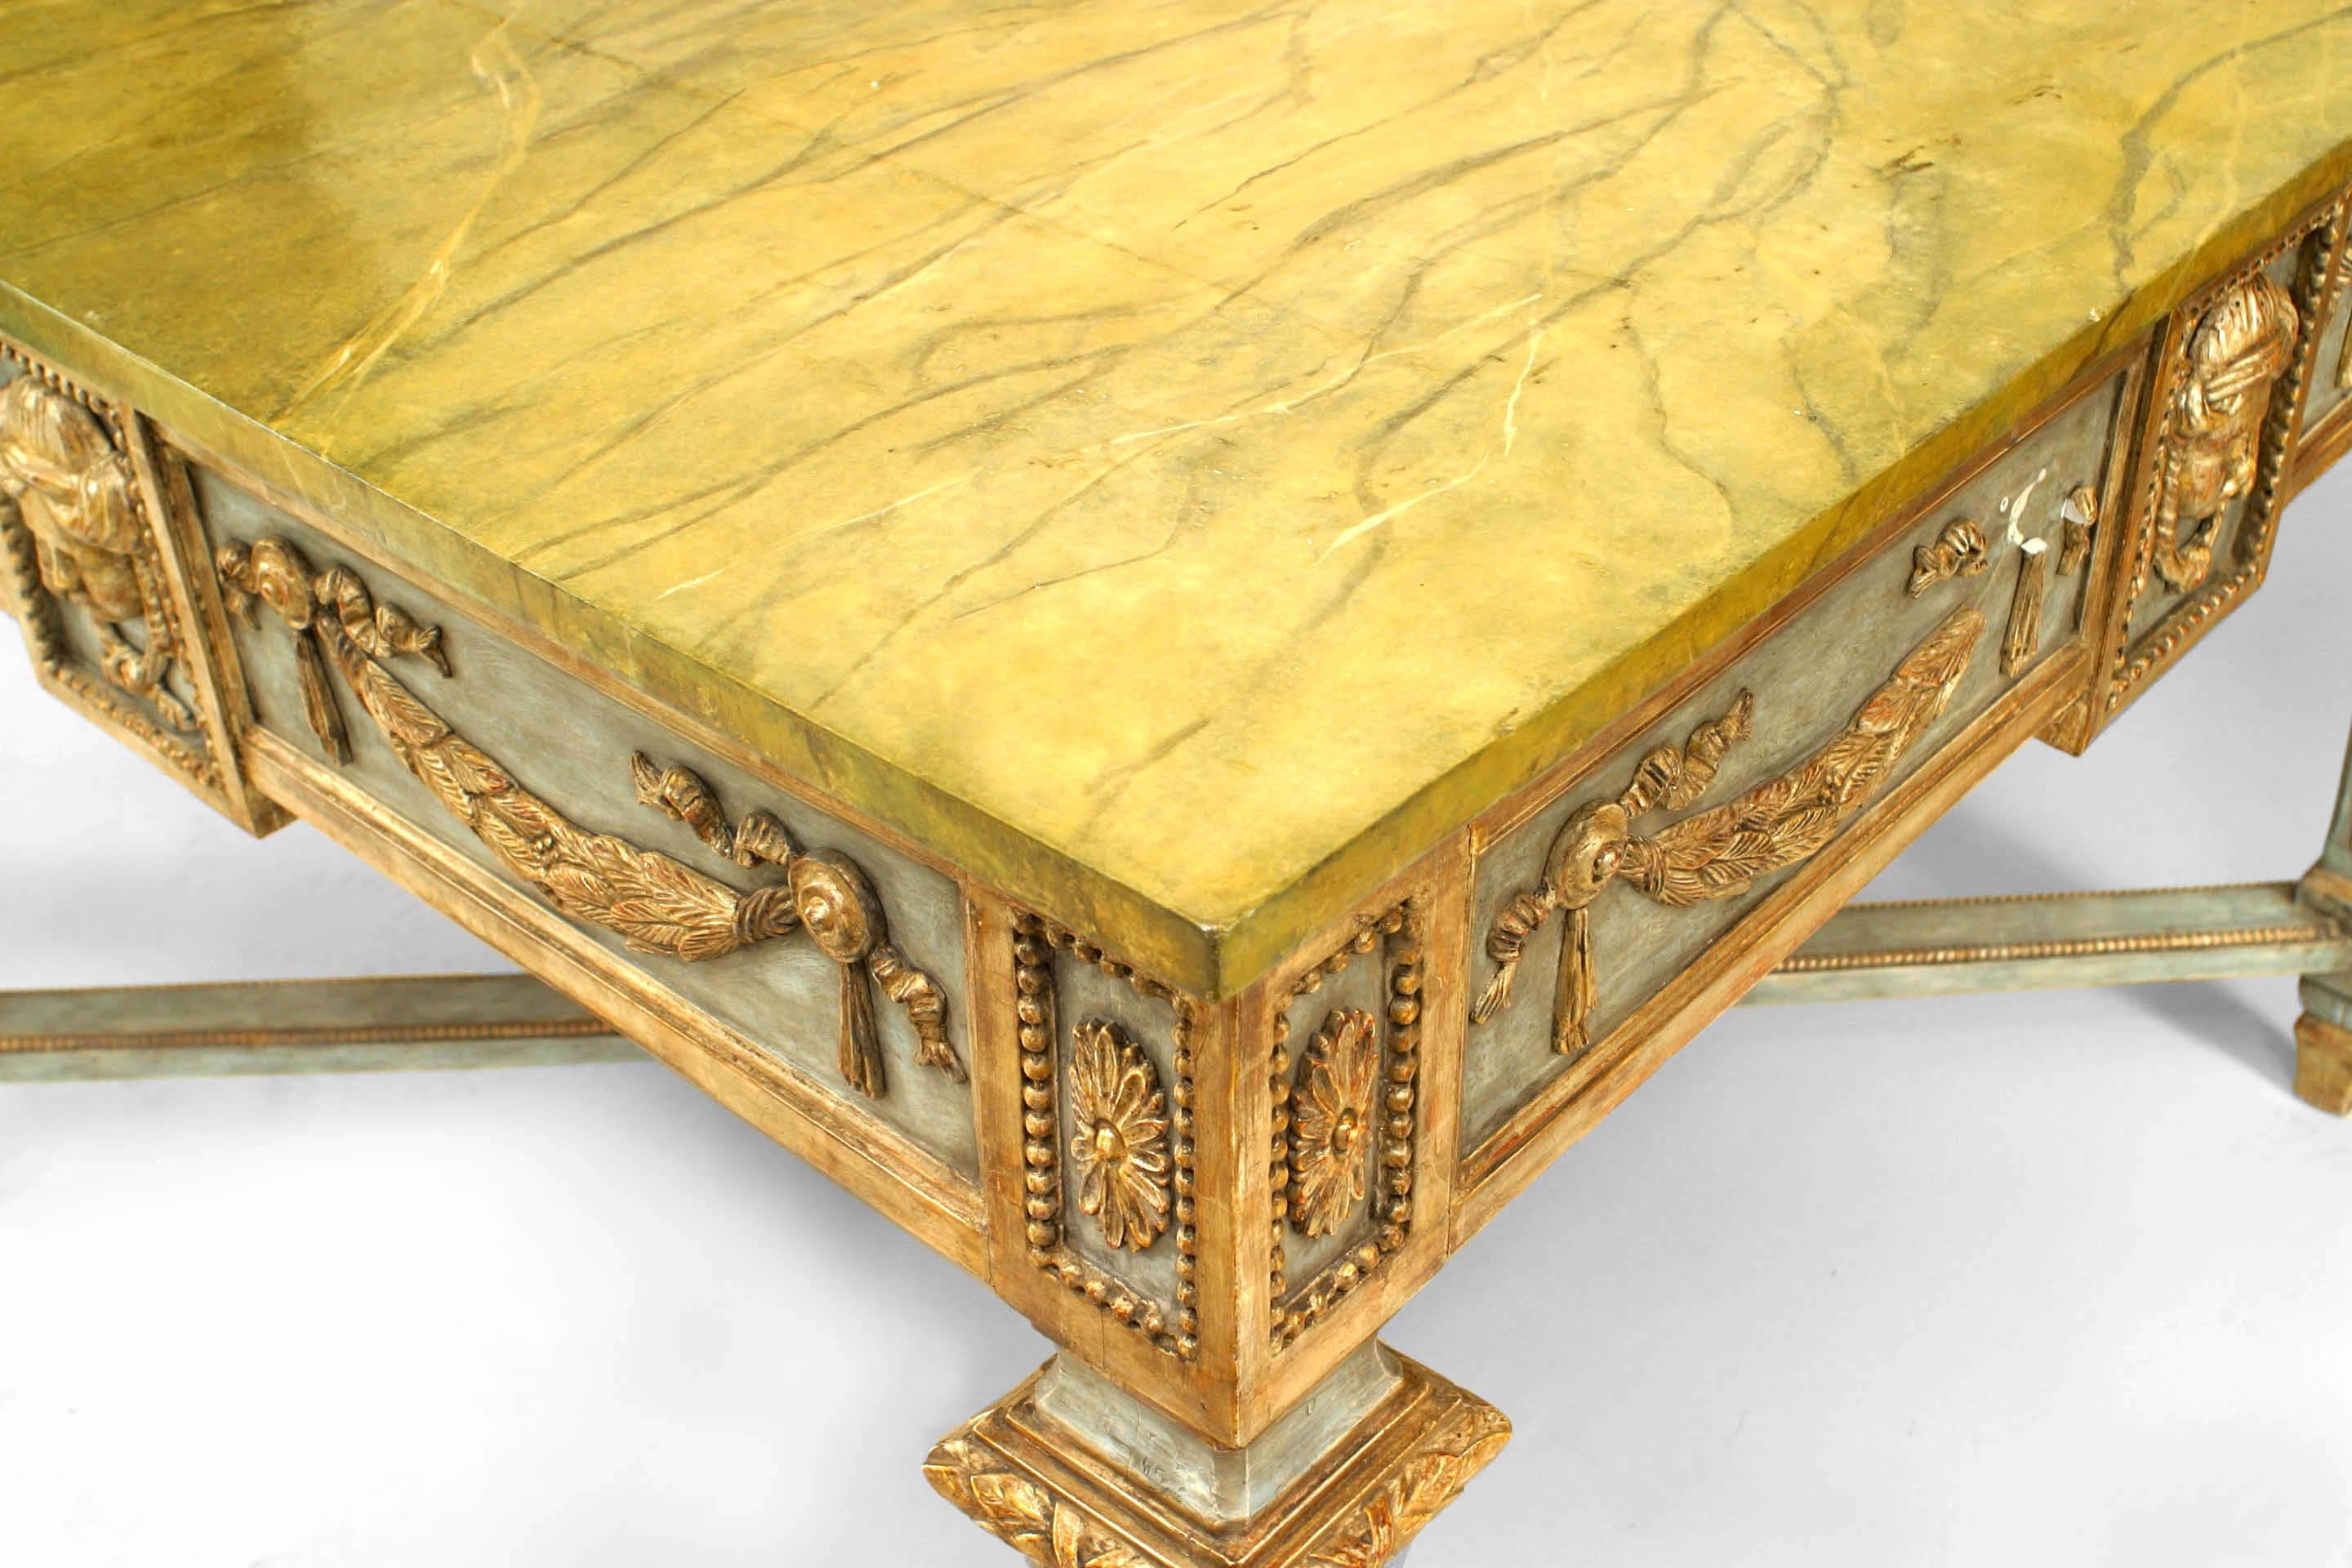 Northern Italian Neo-classic (late 18th Century) silver gilt & blue painted square center table with swags & masks on apron over tapered square legs with stretcher & faux painted marble top.
